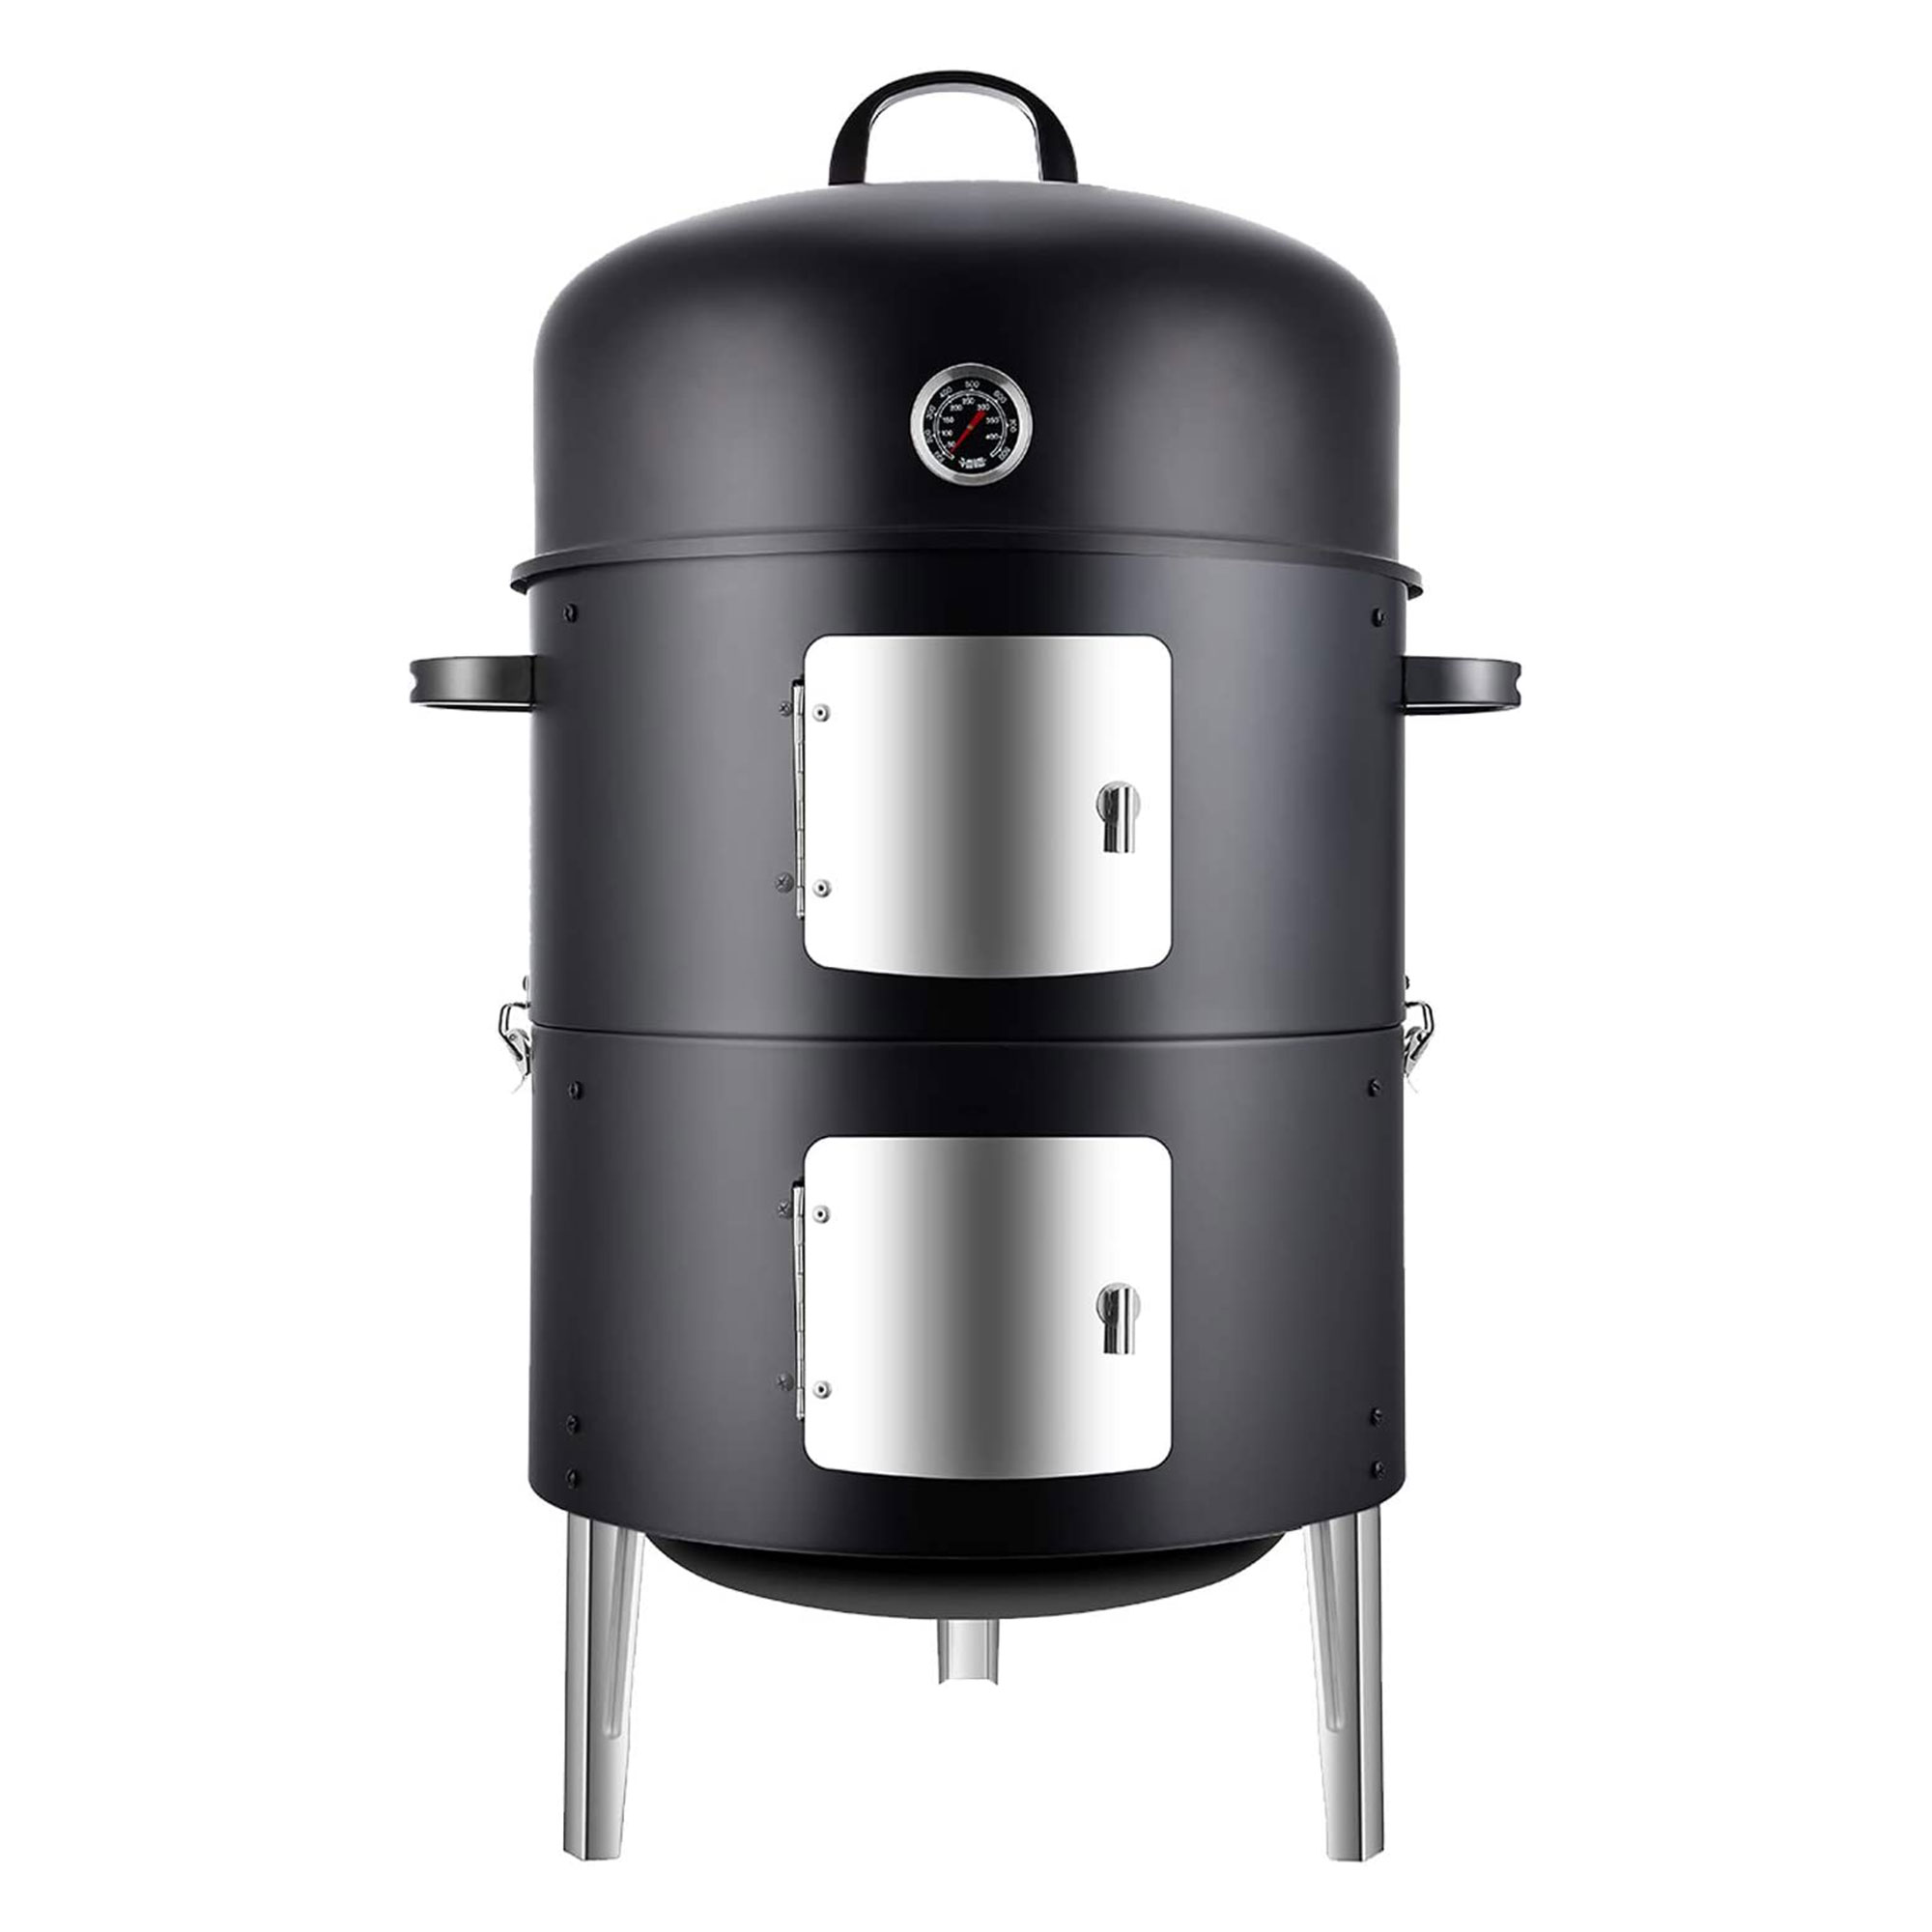 Realcook 17 inch Vertical Heavy Duty Steel Charcoal Outdoor Smoker, Black - image 1 of 9